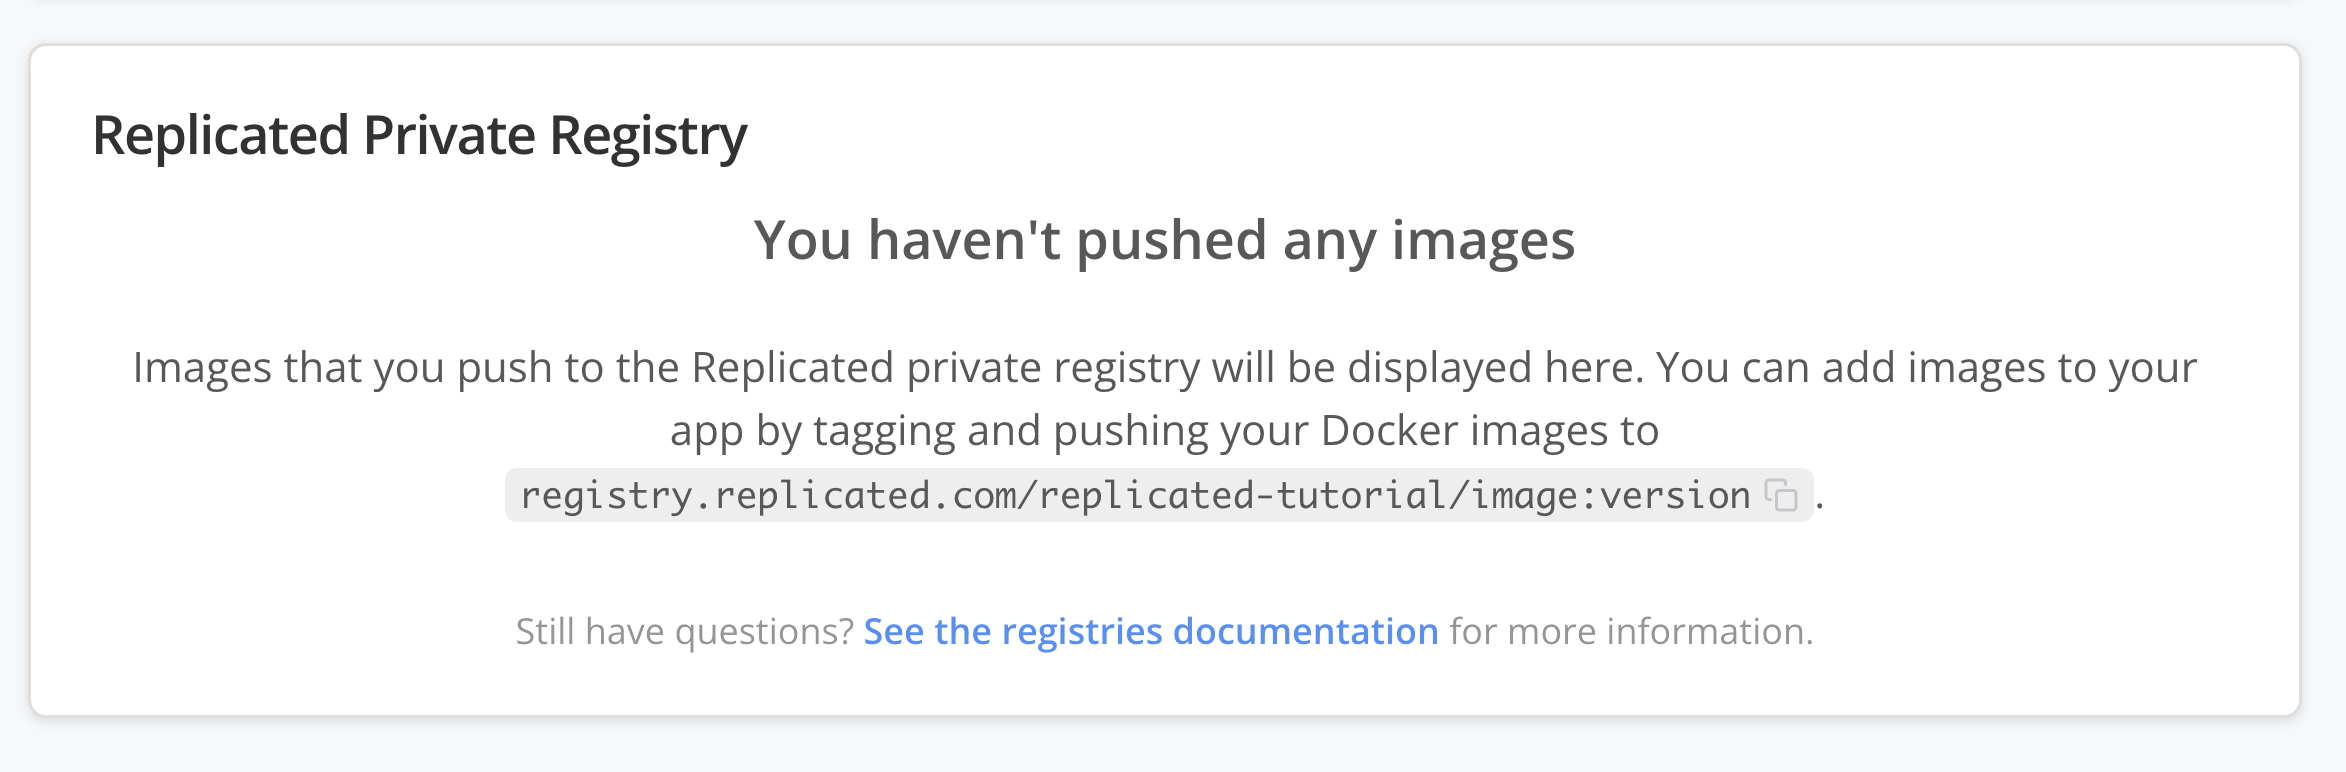 Replicated Private Registry section of the vendor portal Images page